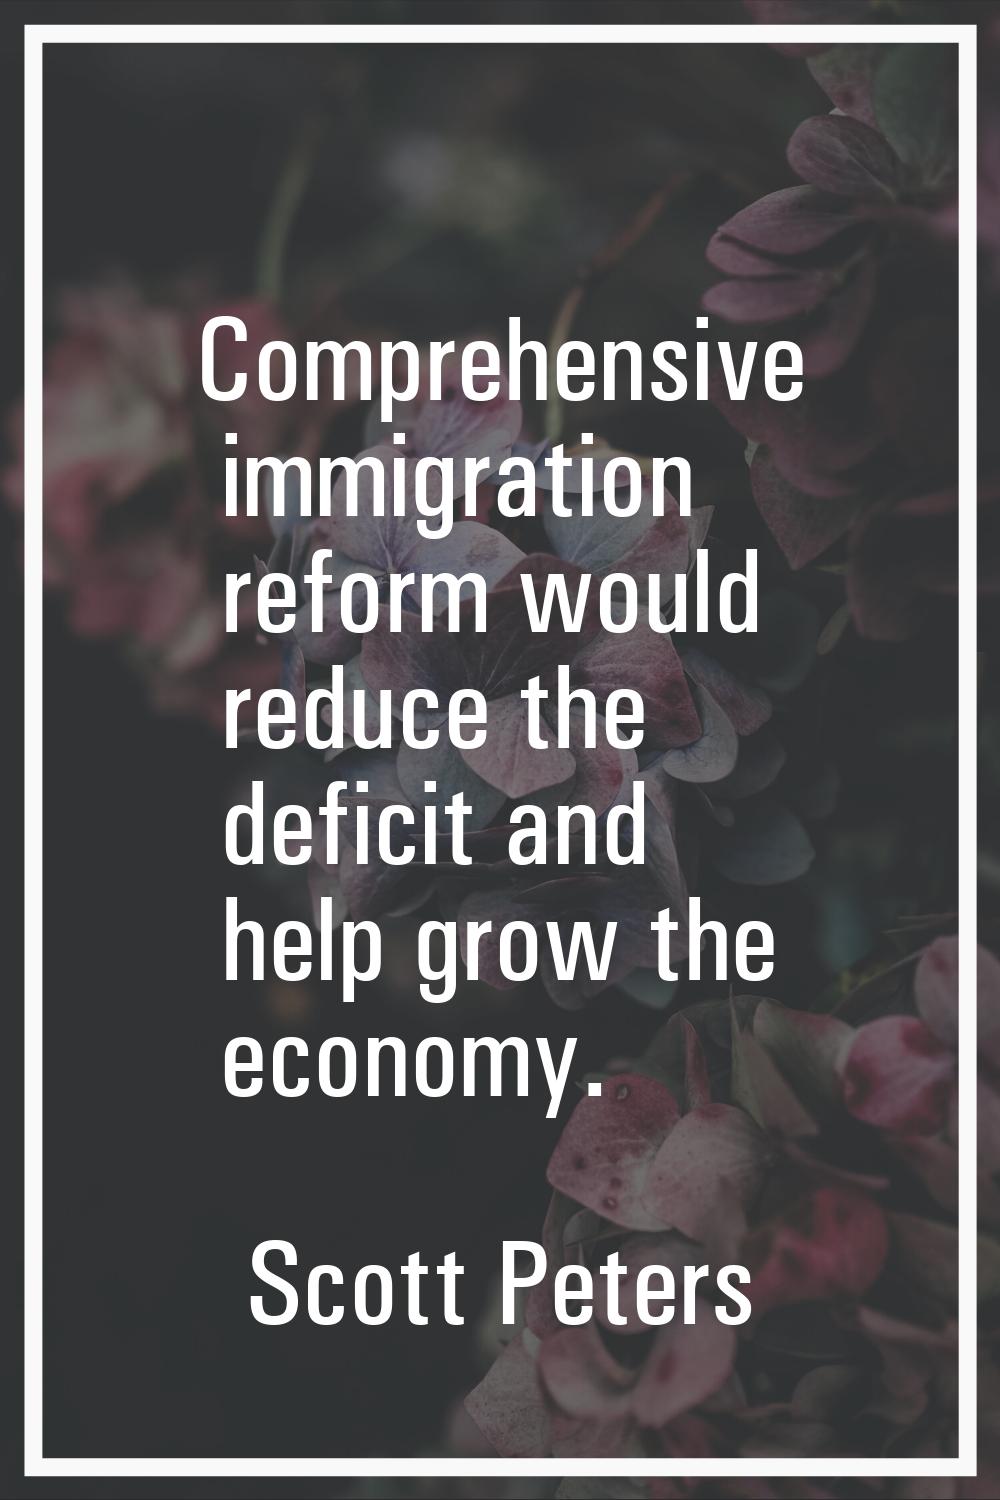 Comprehensive immigration reform would reduce the deficit and help grow the economy.